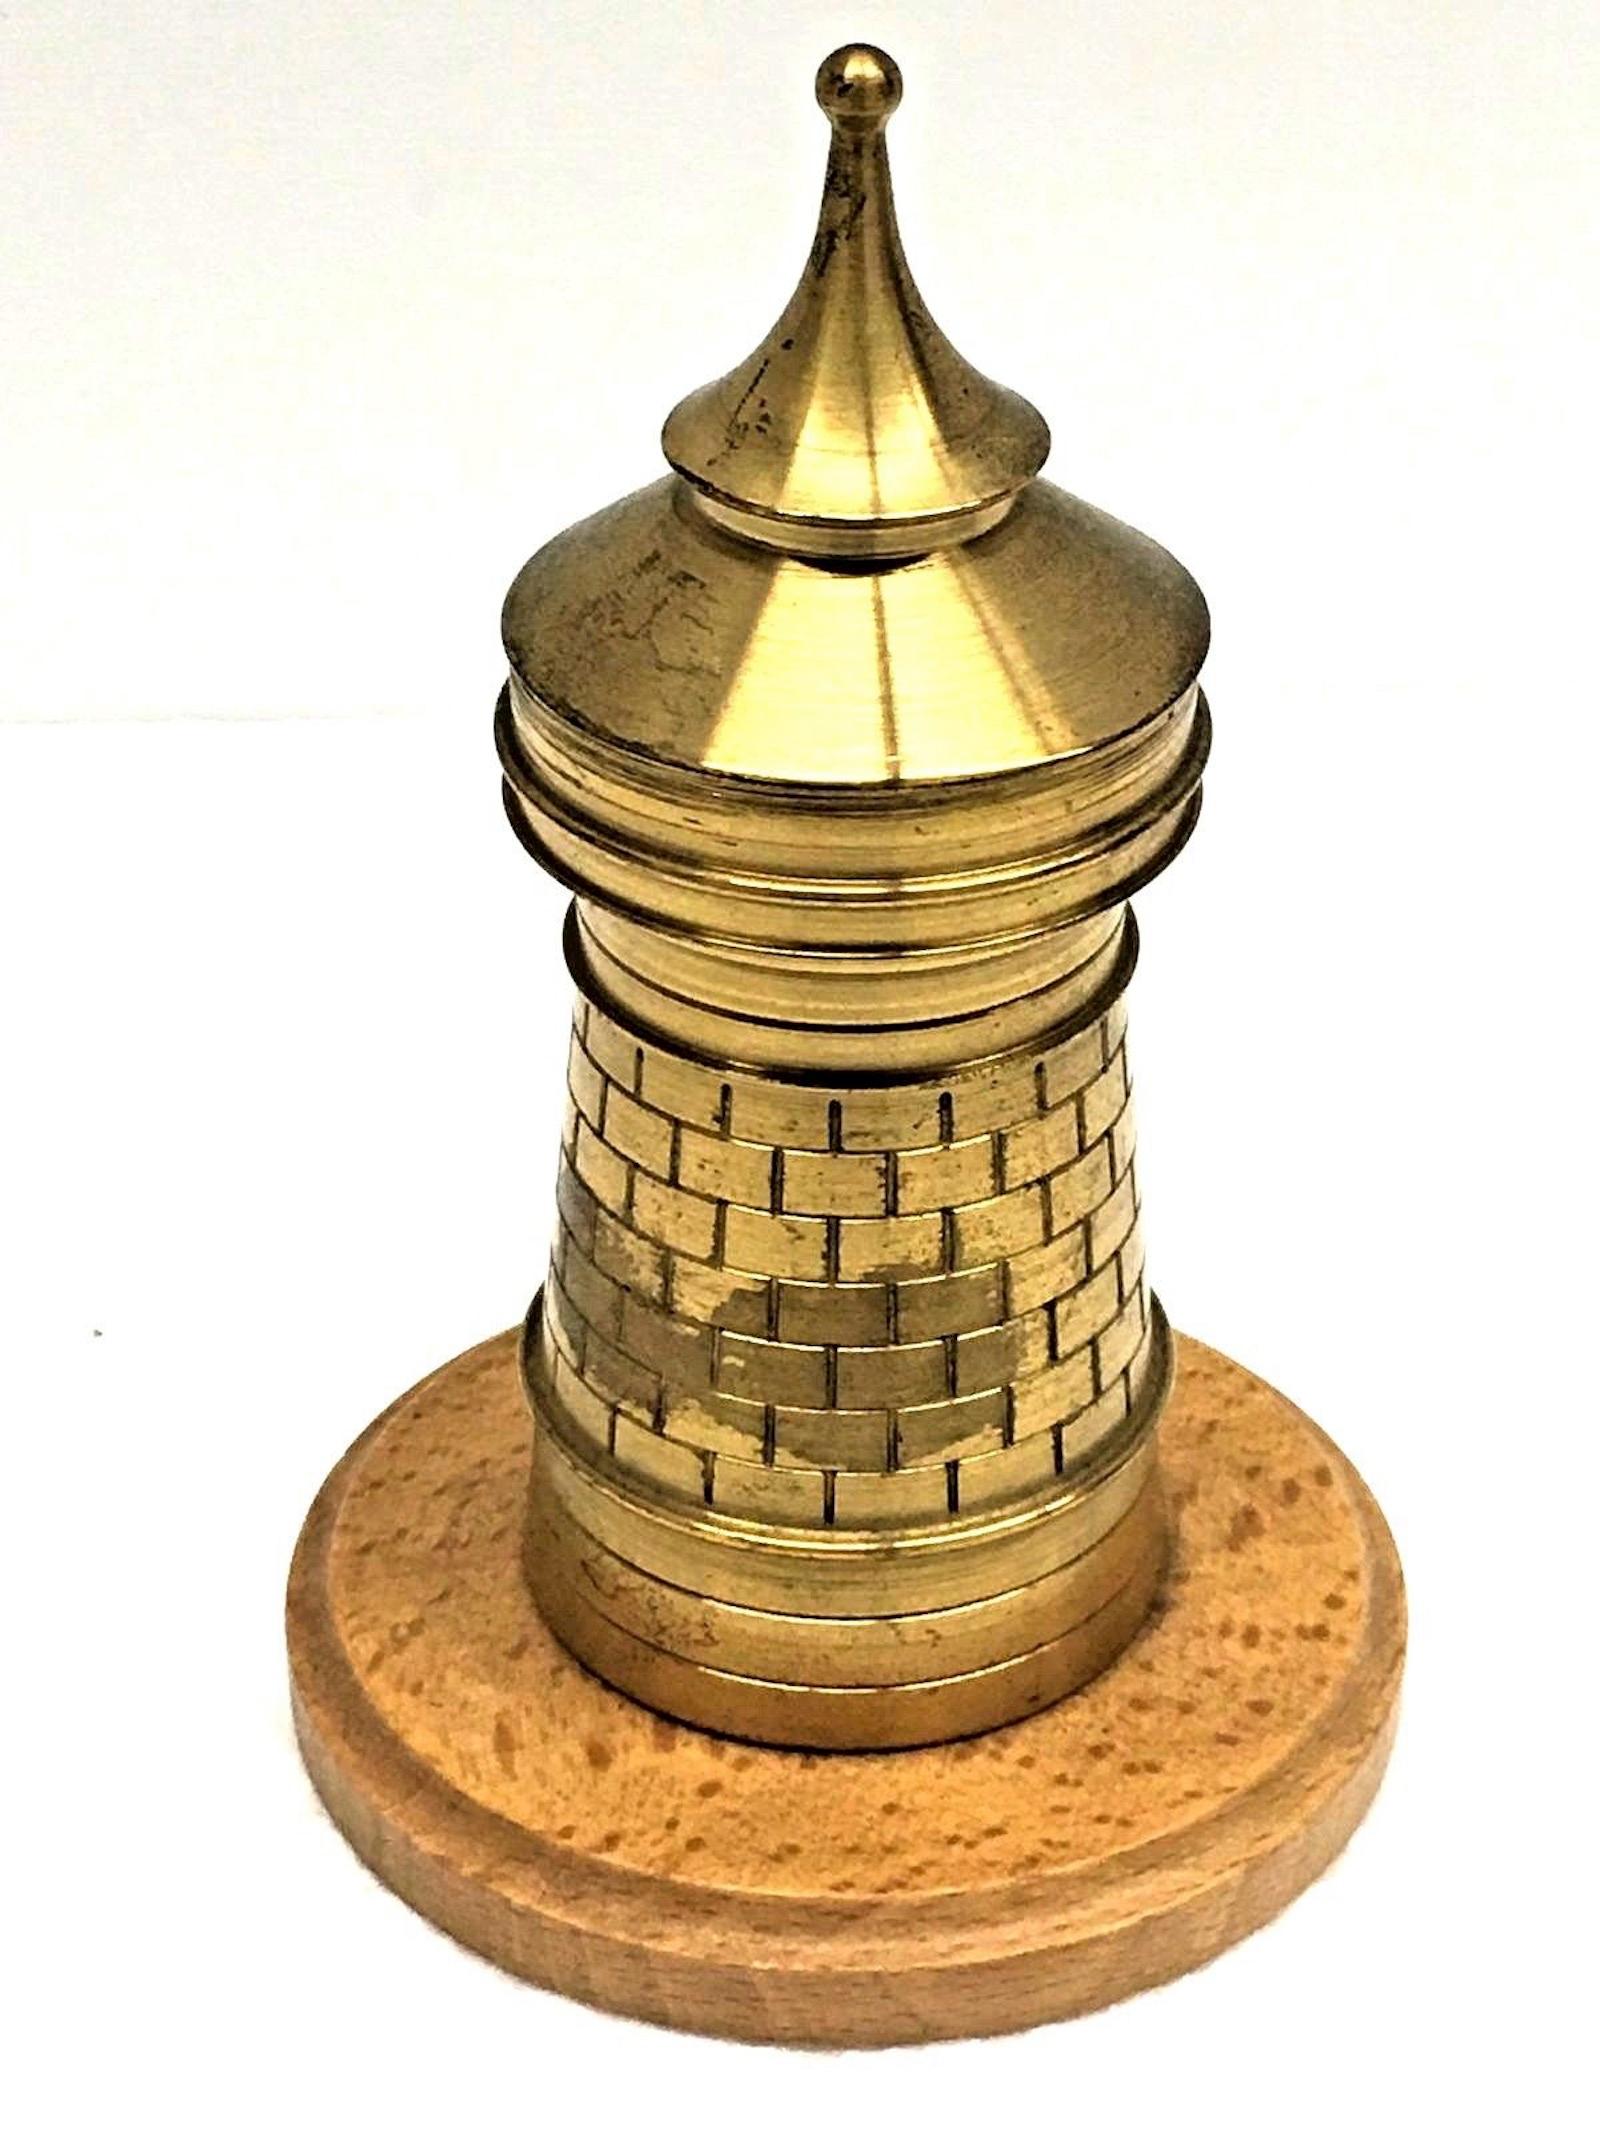 Two Nuremberg City Tower 1960s Souvenir Building Architectural Model Paperweight In Good Condition For Sale In Nuernberg, DE